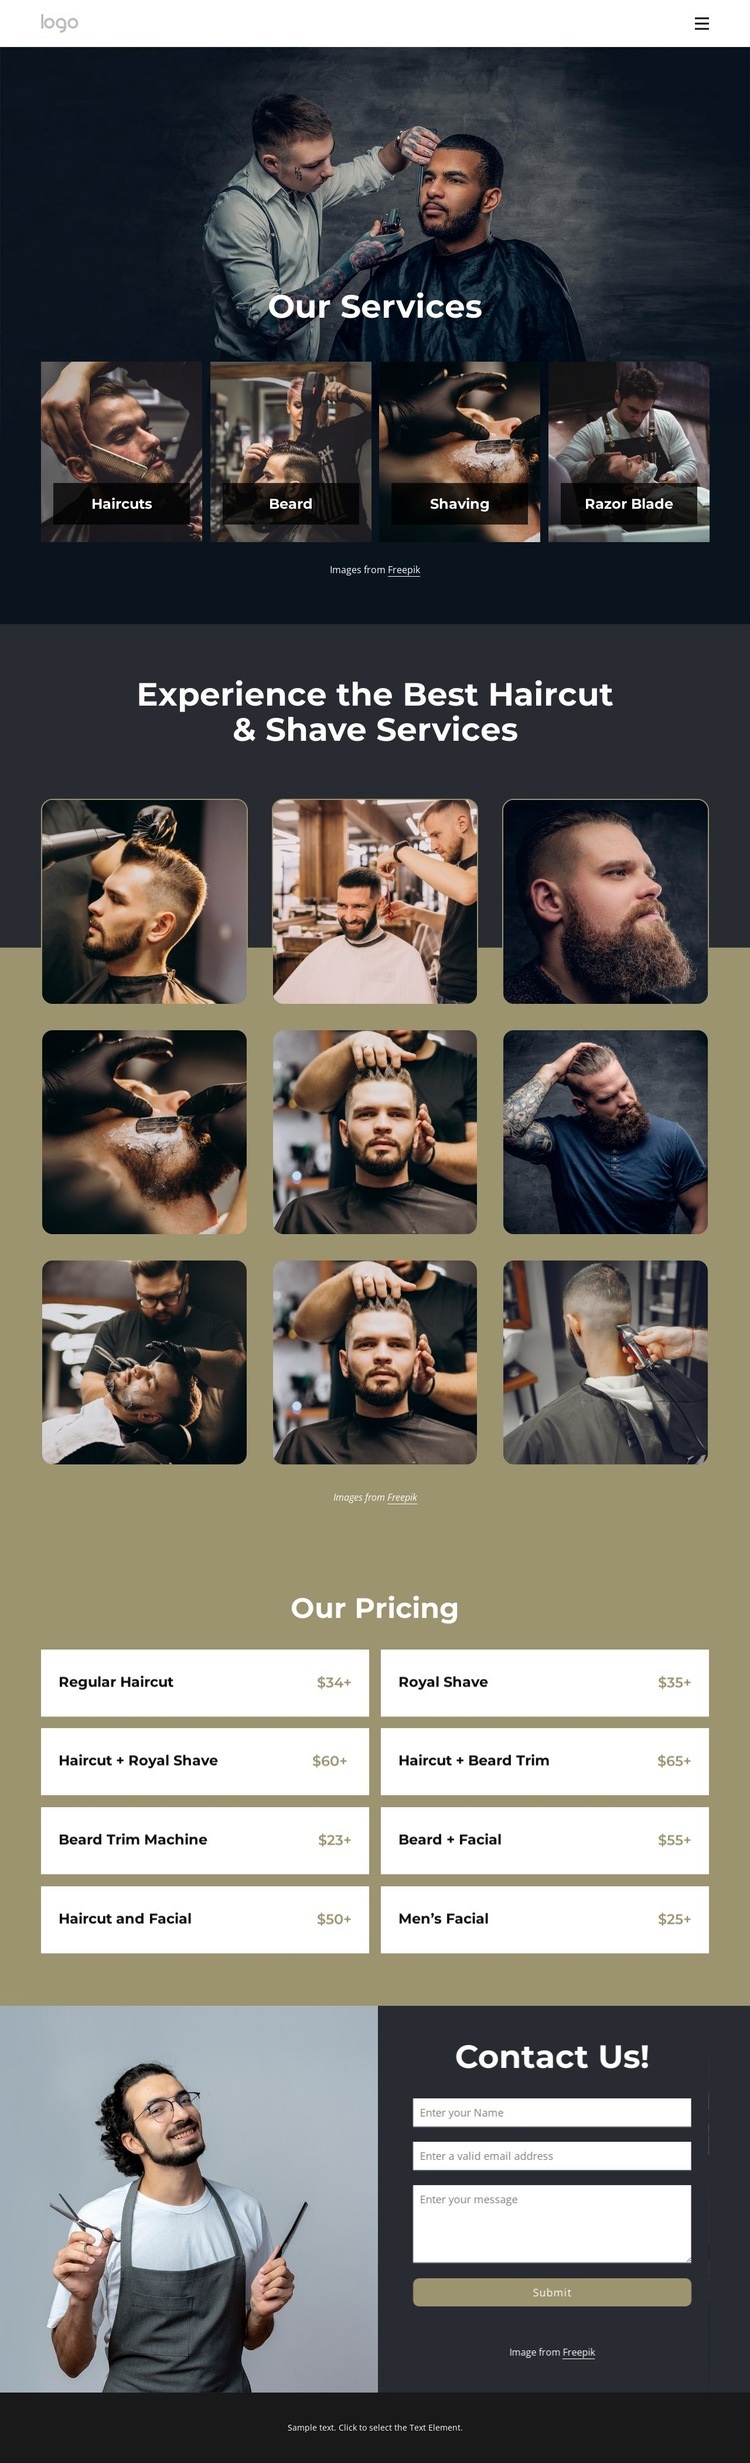 Best haircut and shave services Homepage Design